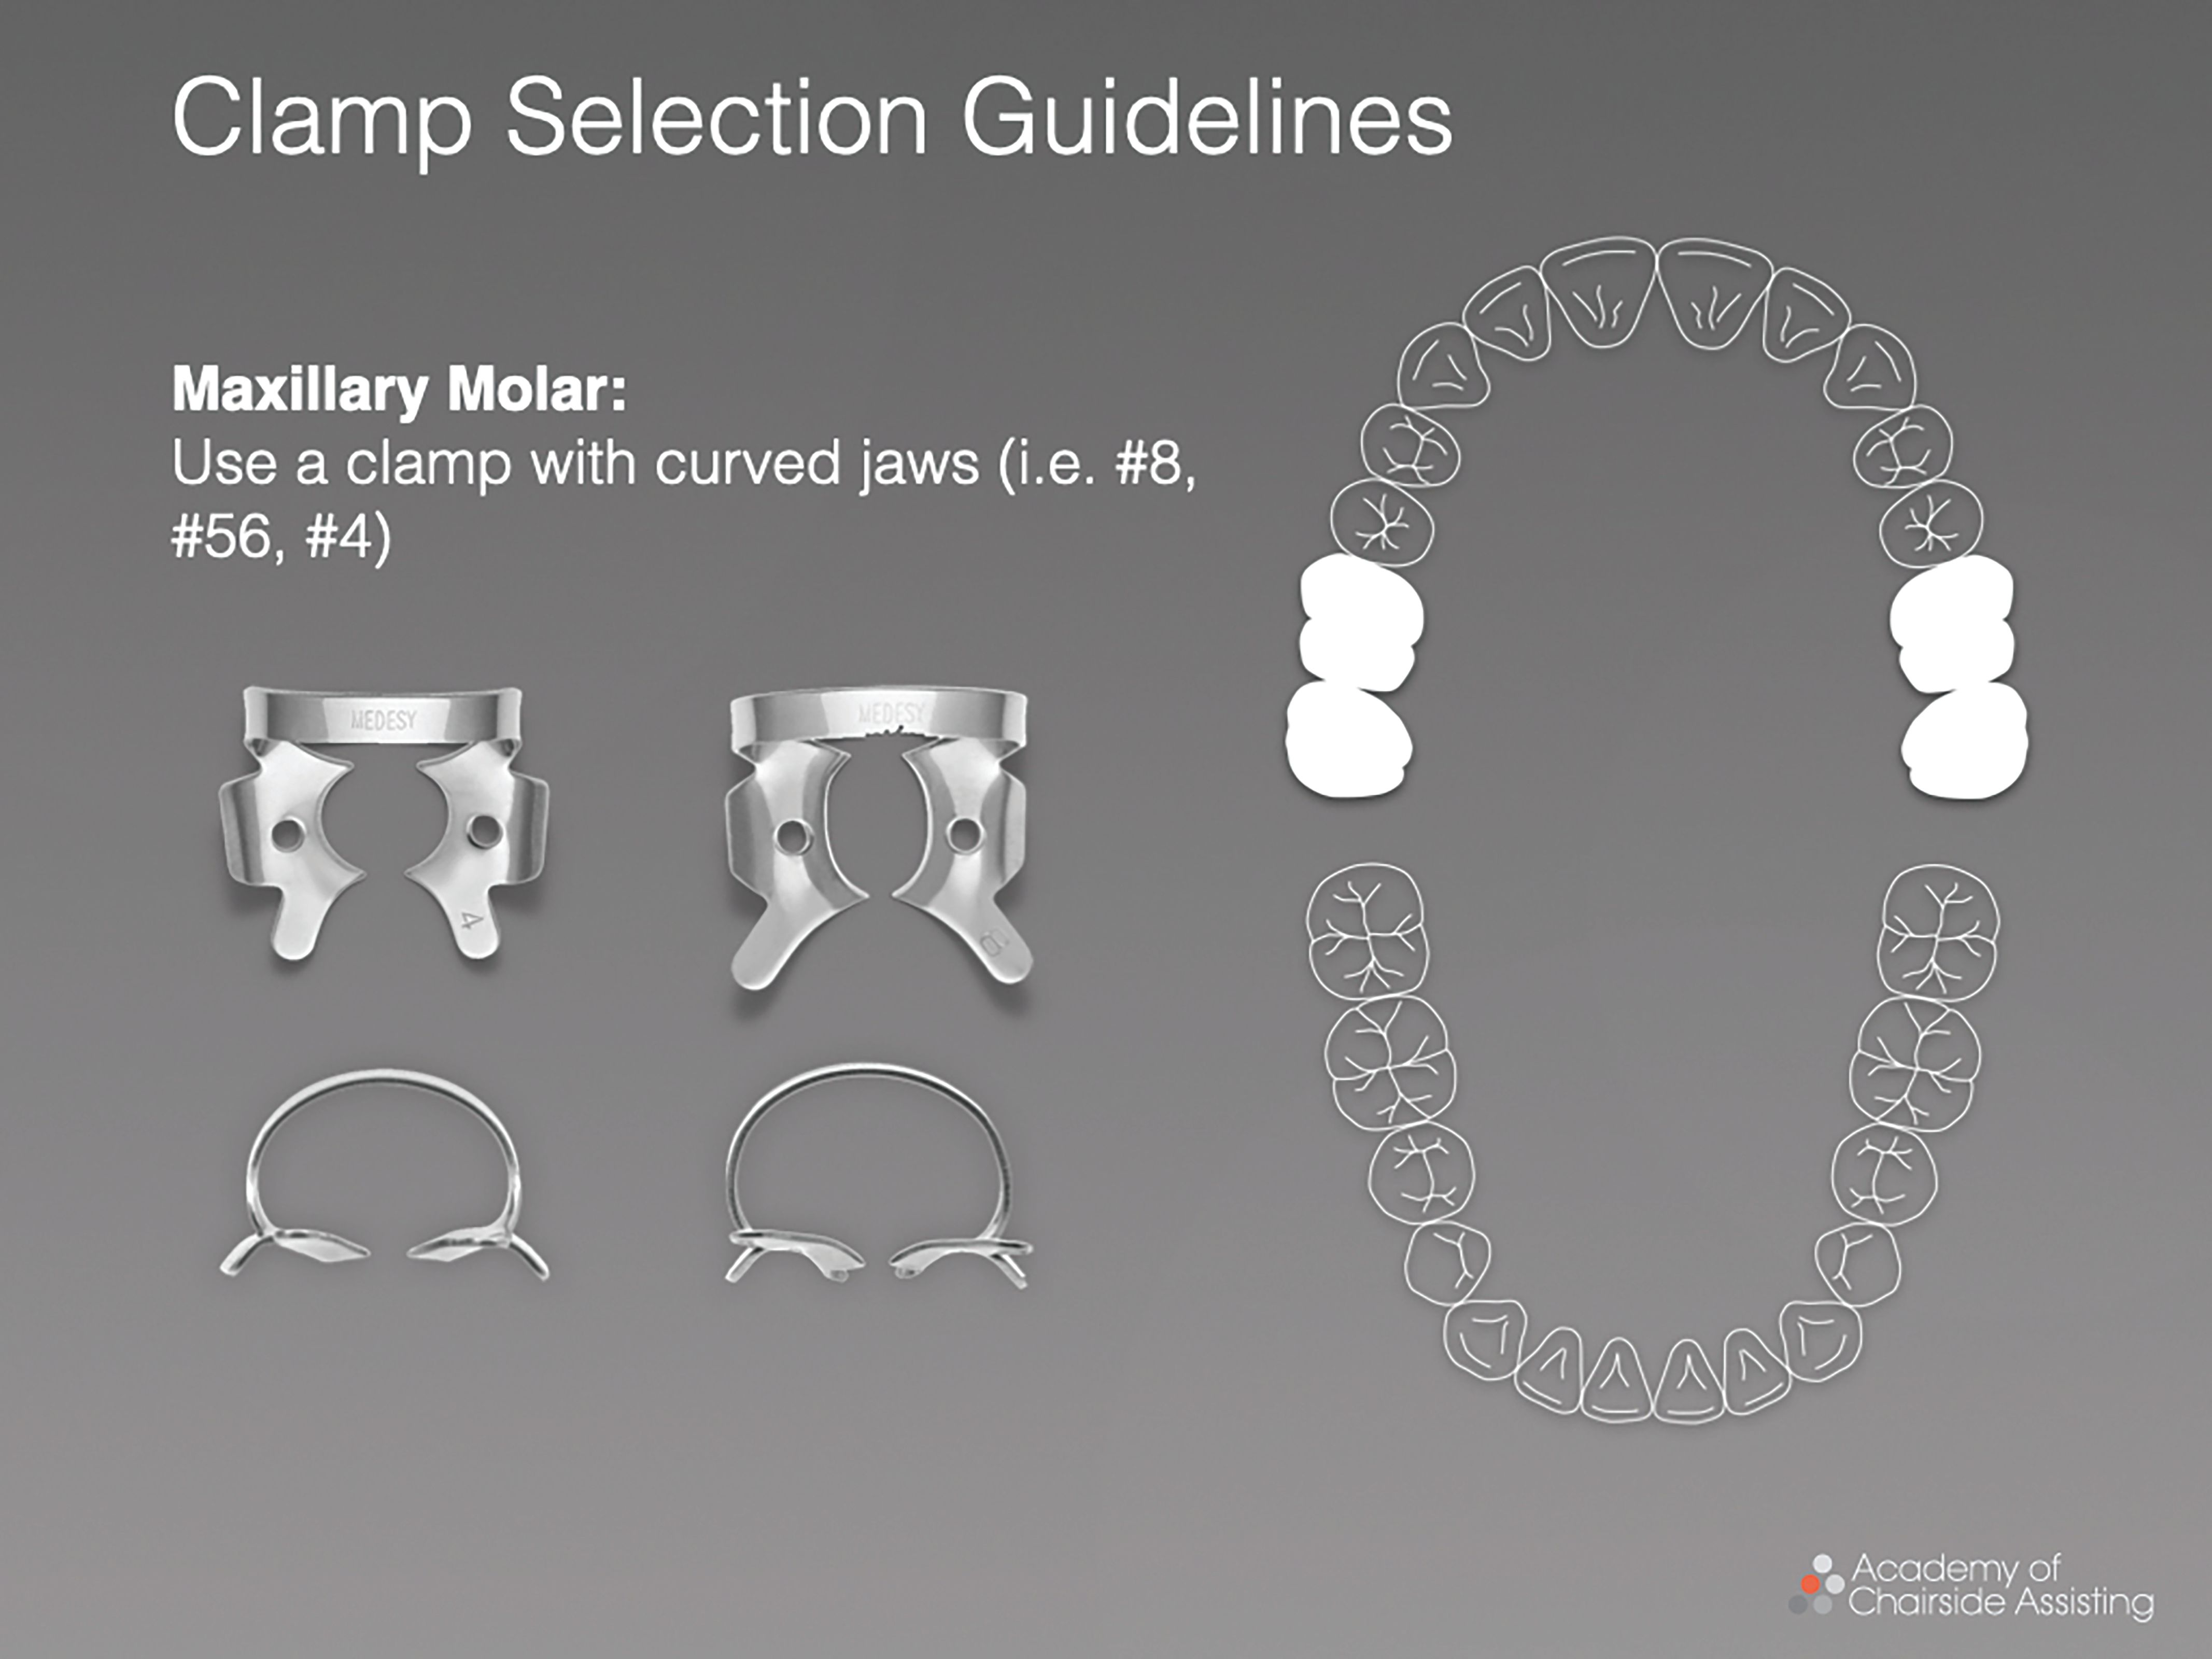 Figure 6. Maxillary molars are best suited with clamps with curved jaws.